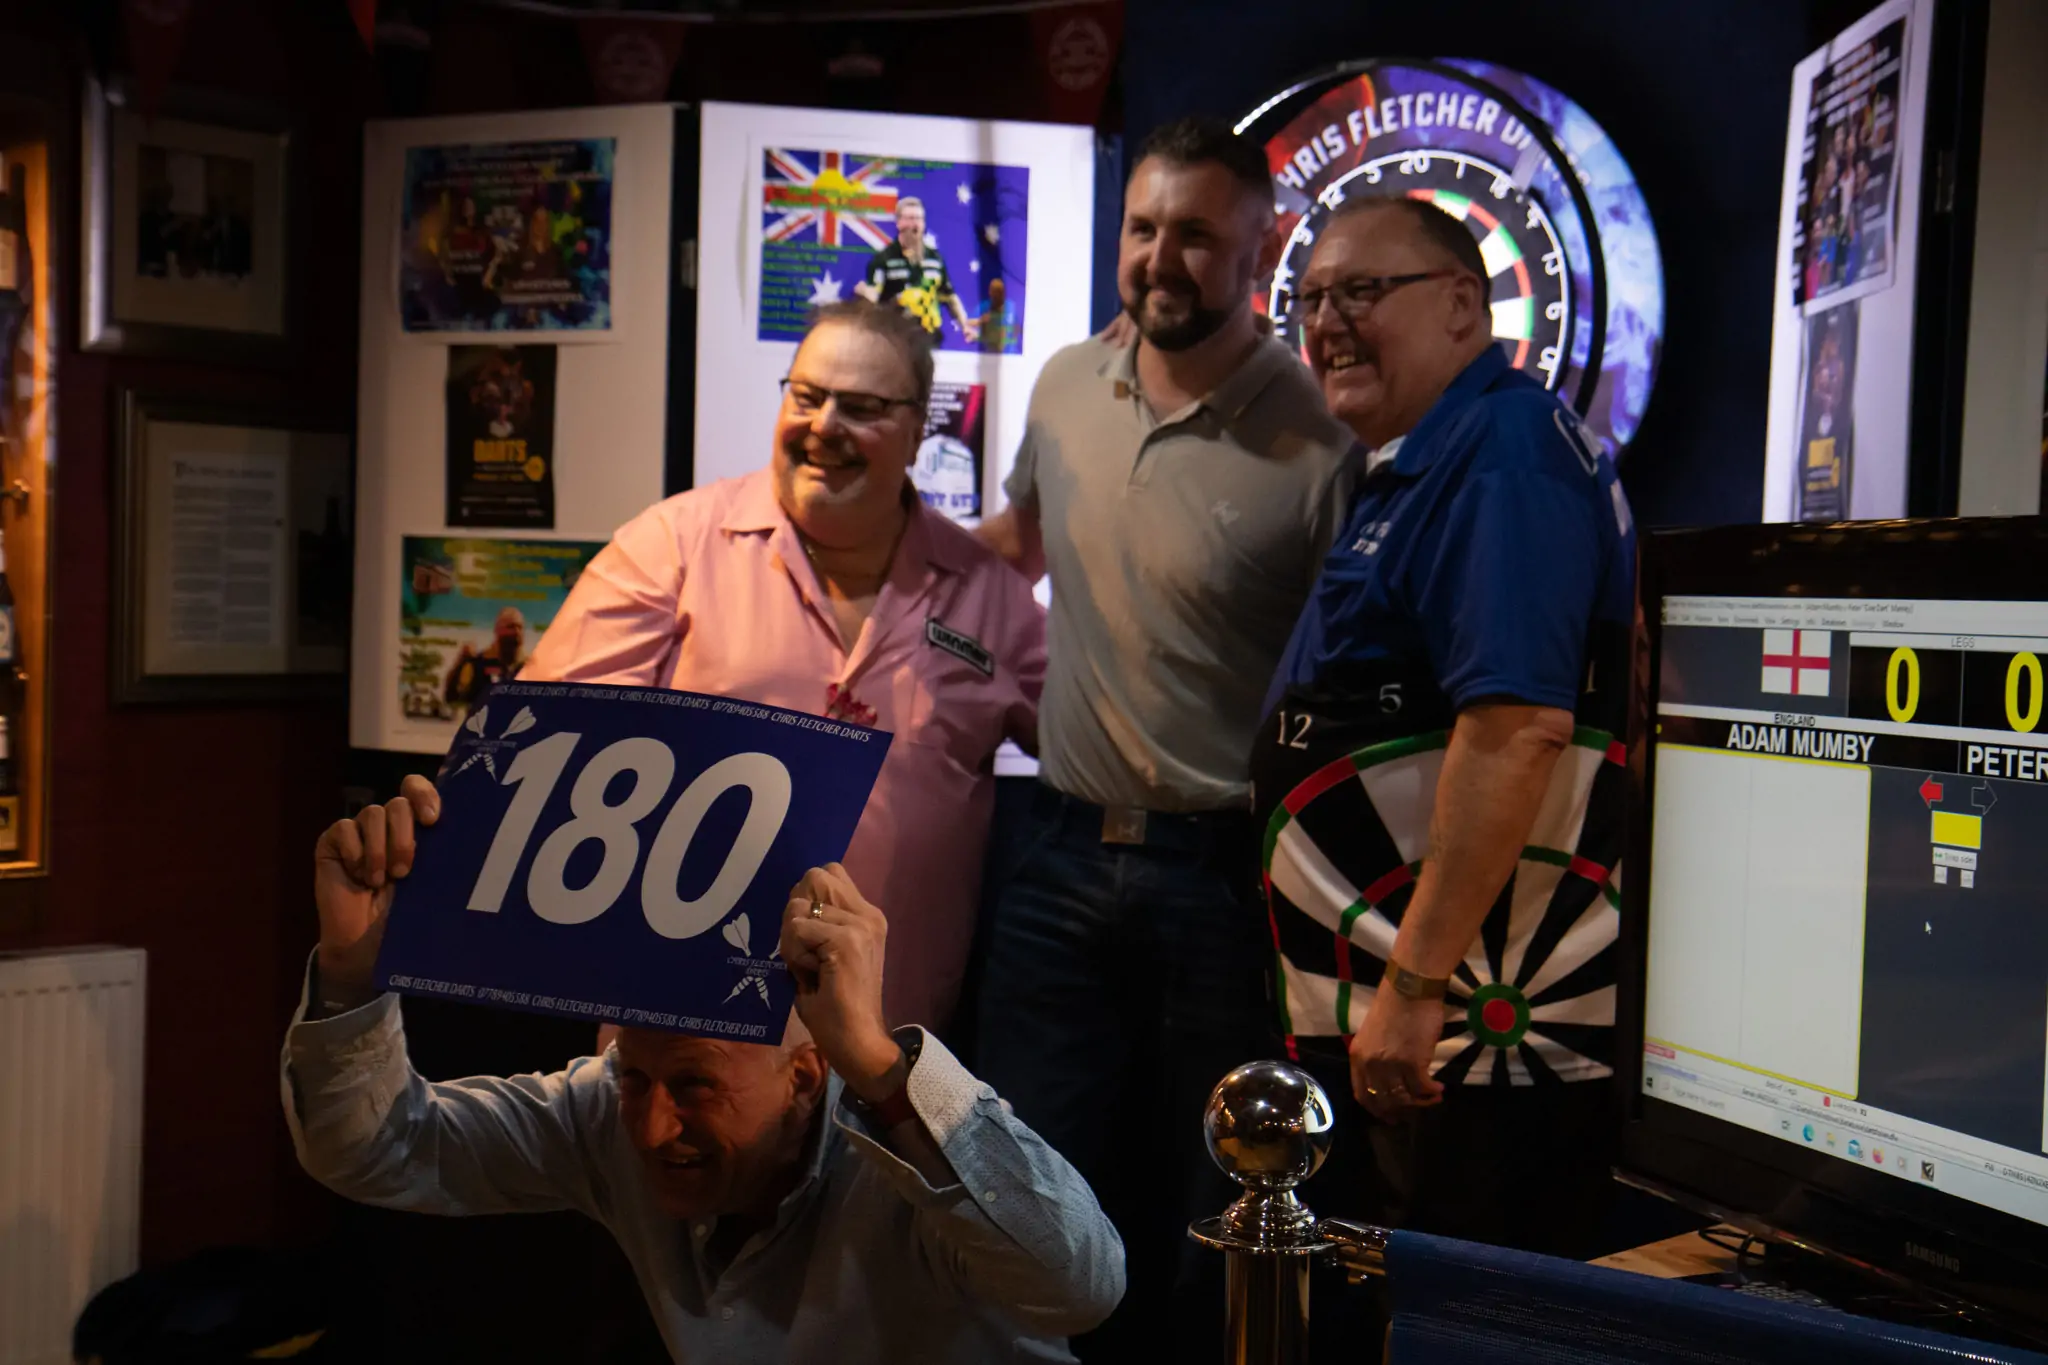 Peter Manley Pro Darts Player at the Batemans 150th anniversary celebrations darts with one of the competitors and Chris Fletcher.